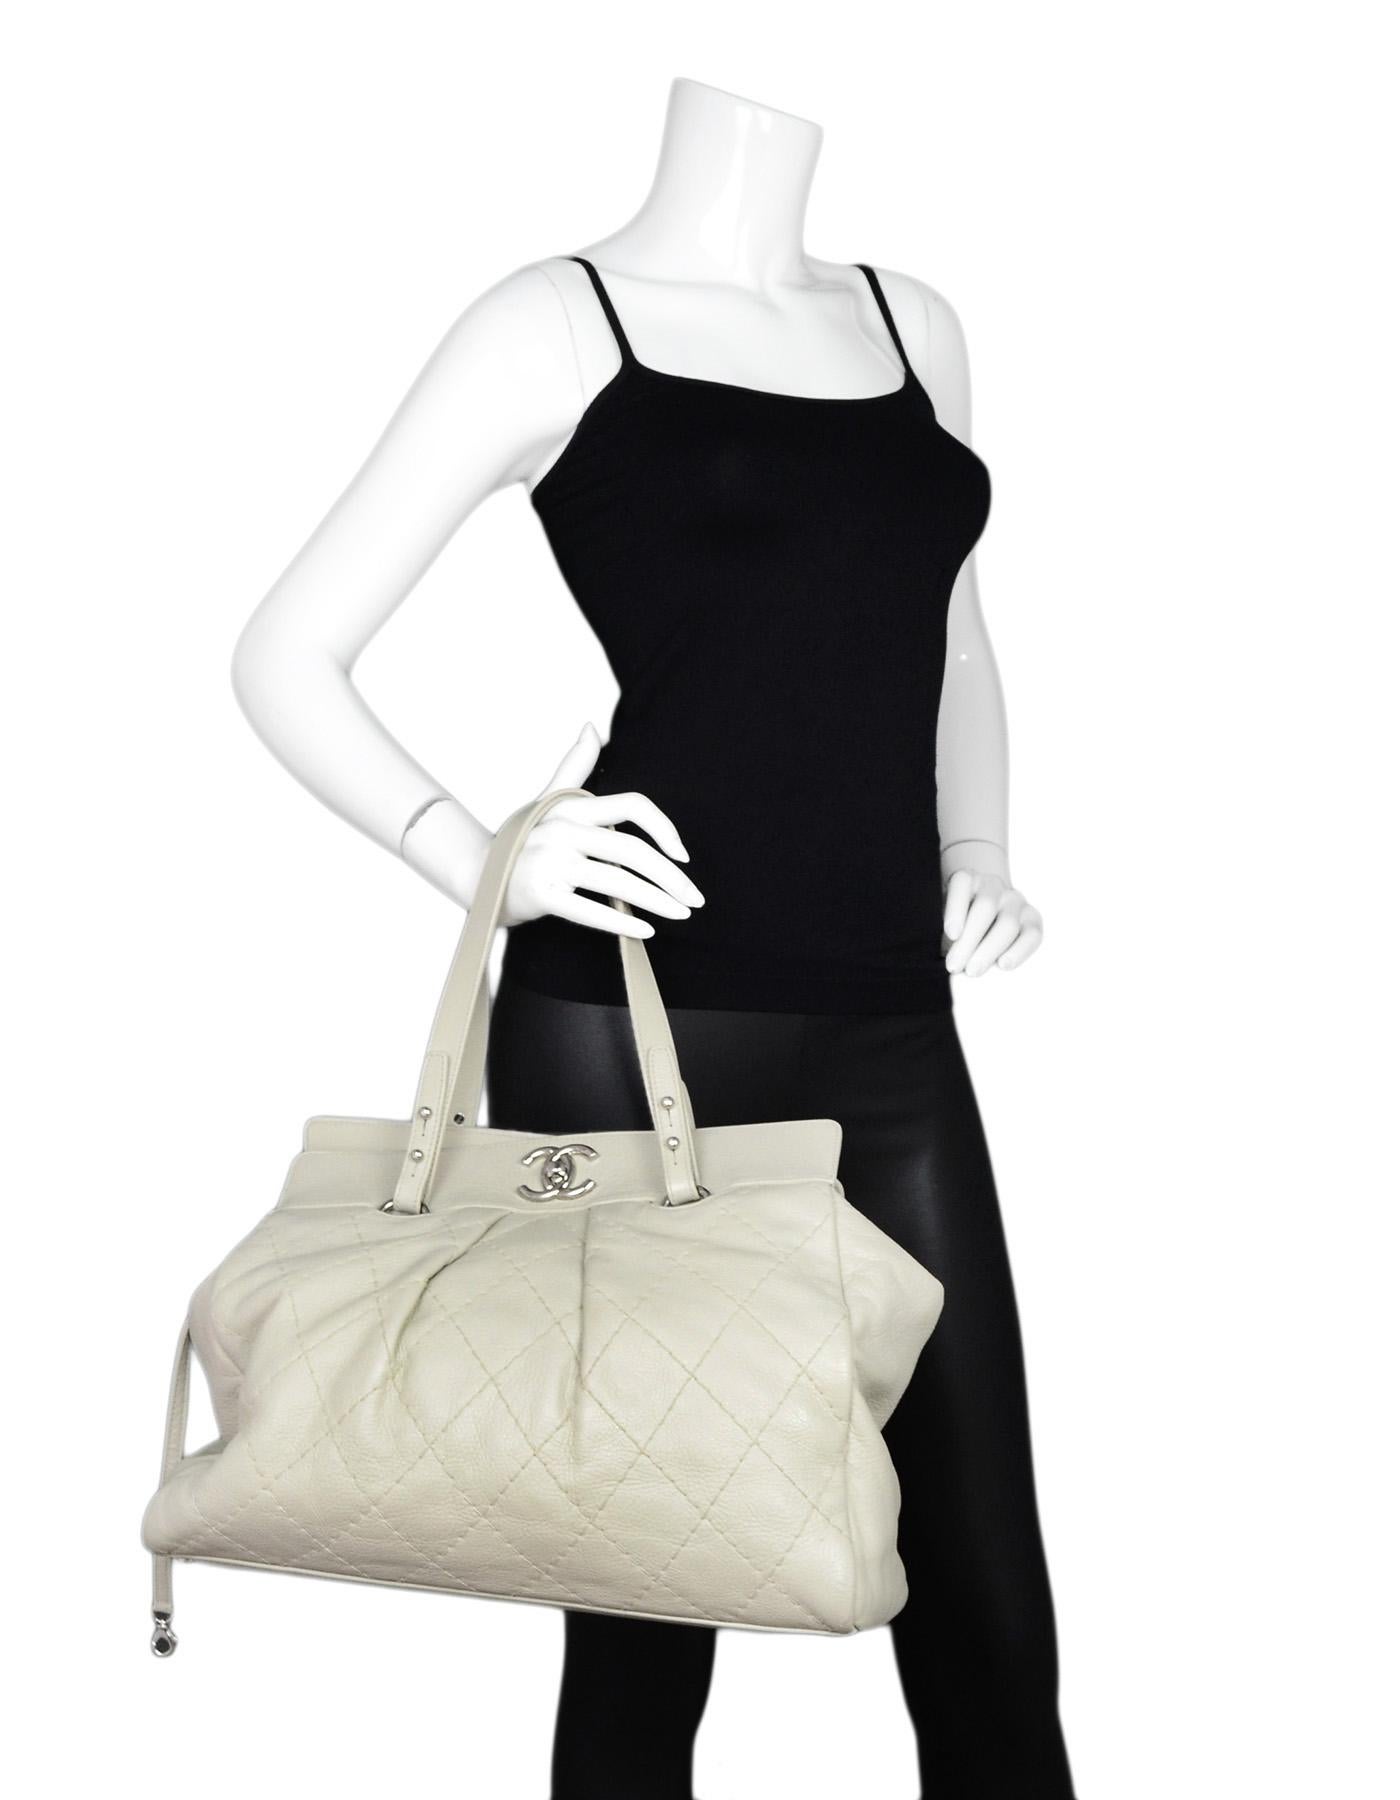 Chanel Ivory Quilted Leather CC Twist Lock Tote Bag

Made In: Italy
Year of Production: 2006
Color: Ivory
Hardware: Silvertone
Materials: Leather and metal
Lining: White textile
Closure/Opening: CC twist lock
Exterior Pockets: None
Interior Pockets: